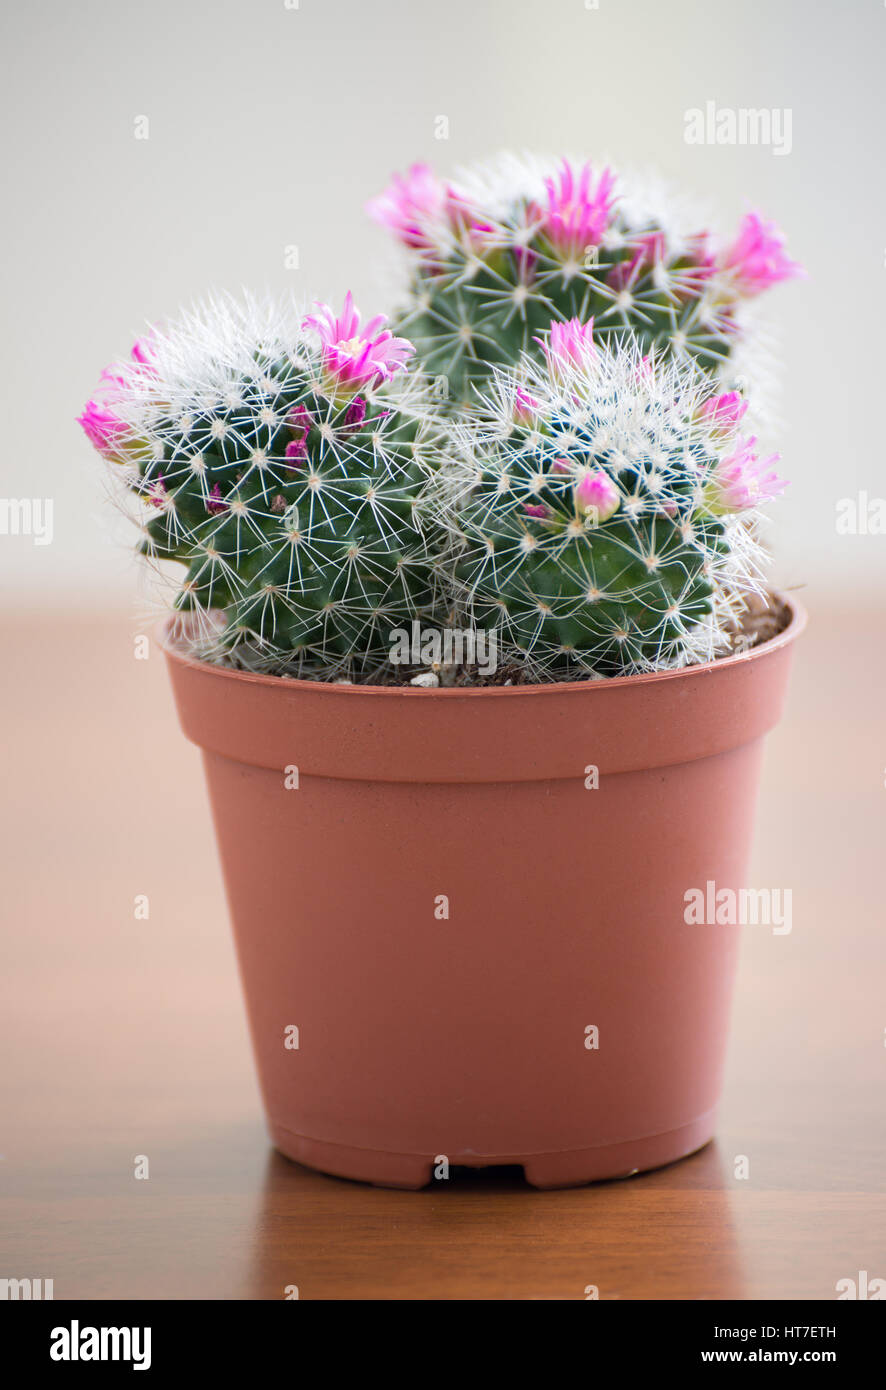 Mammillaria cactus in a pot on the table Stock Photo